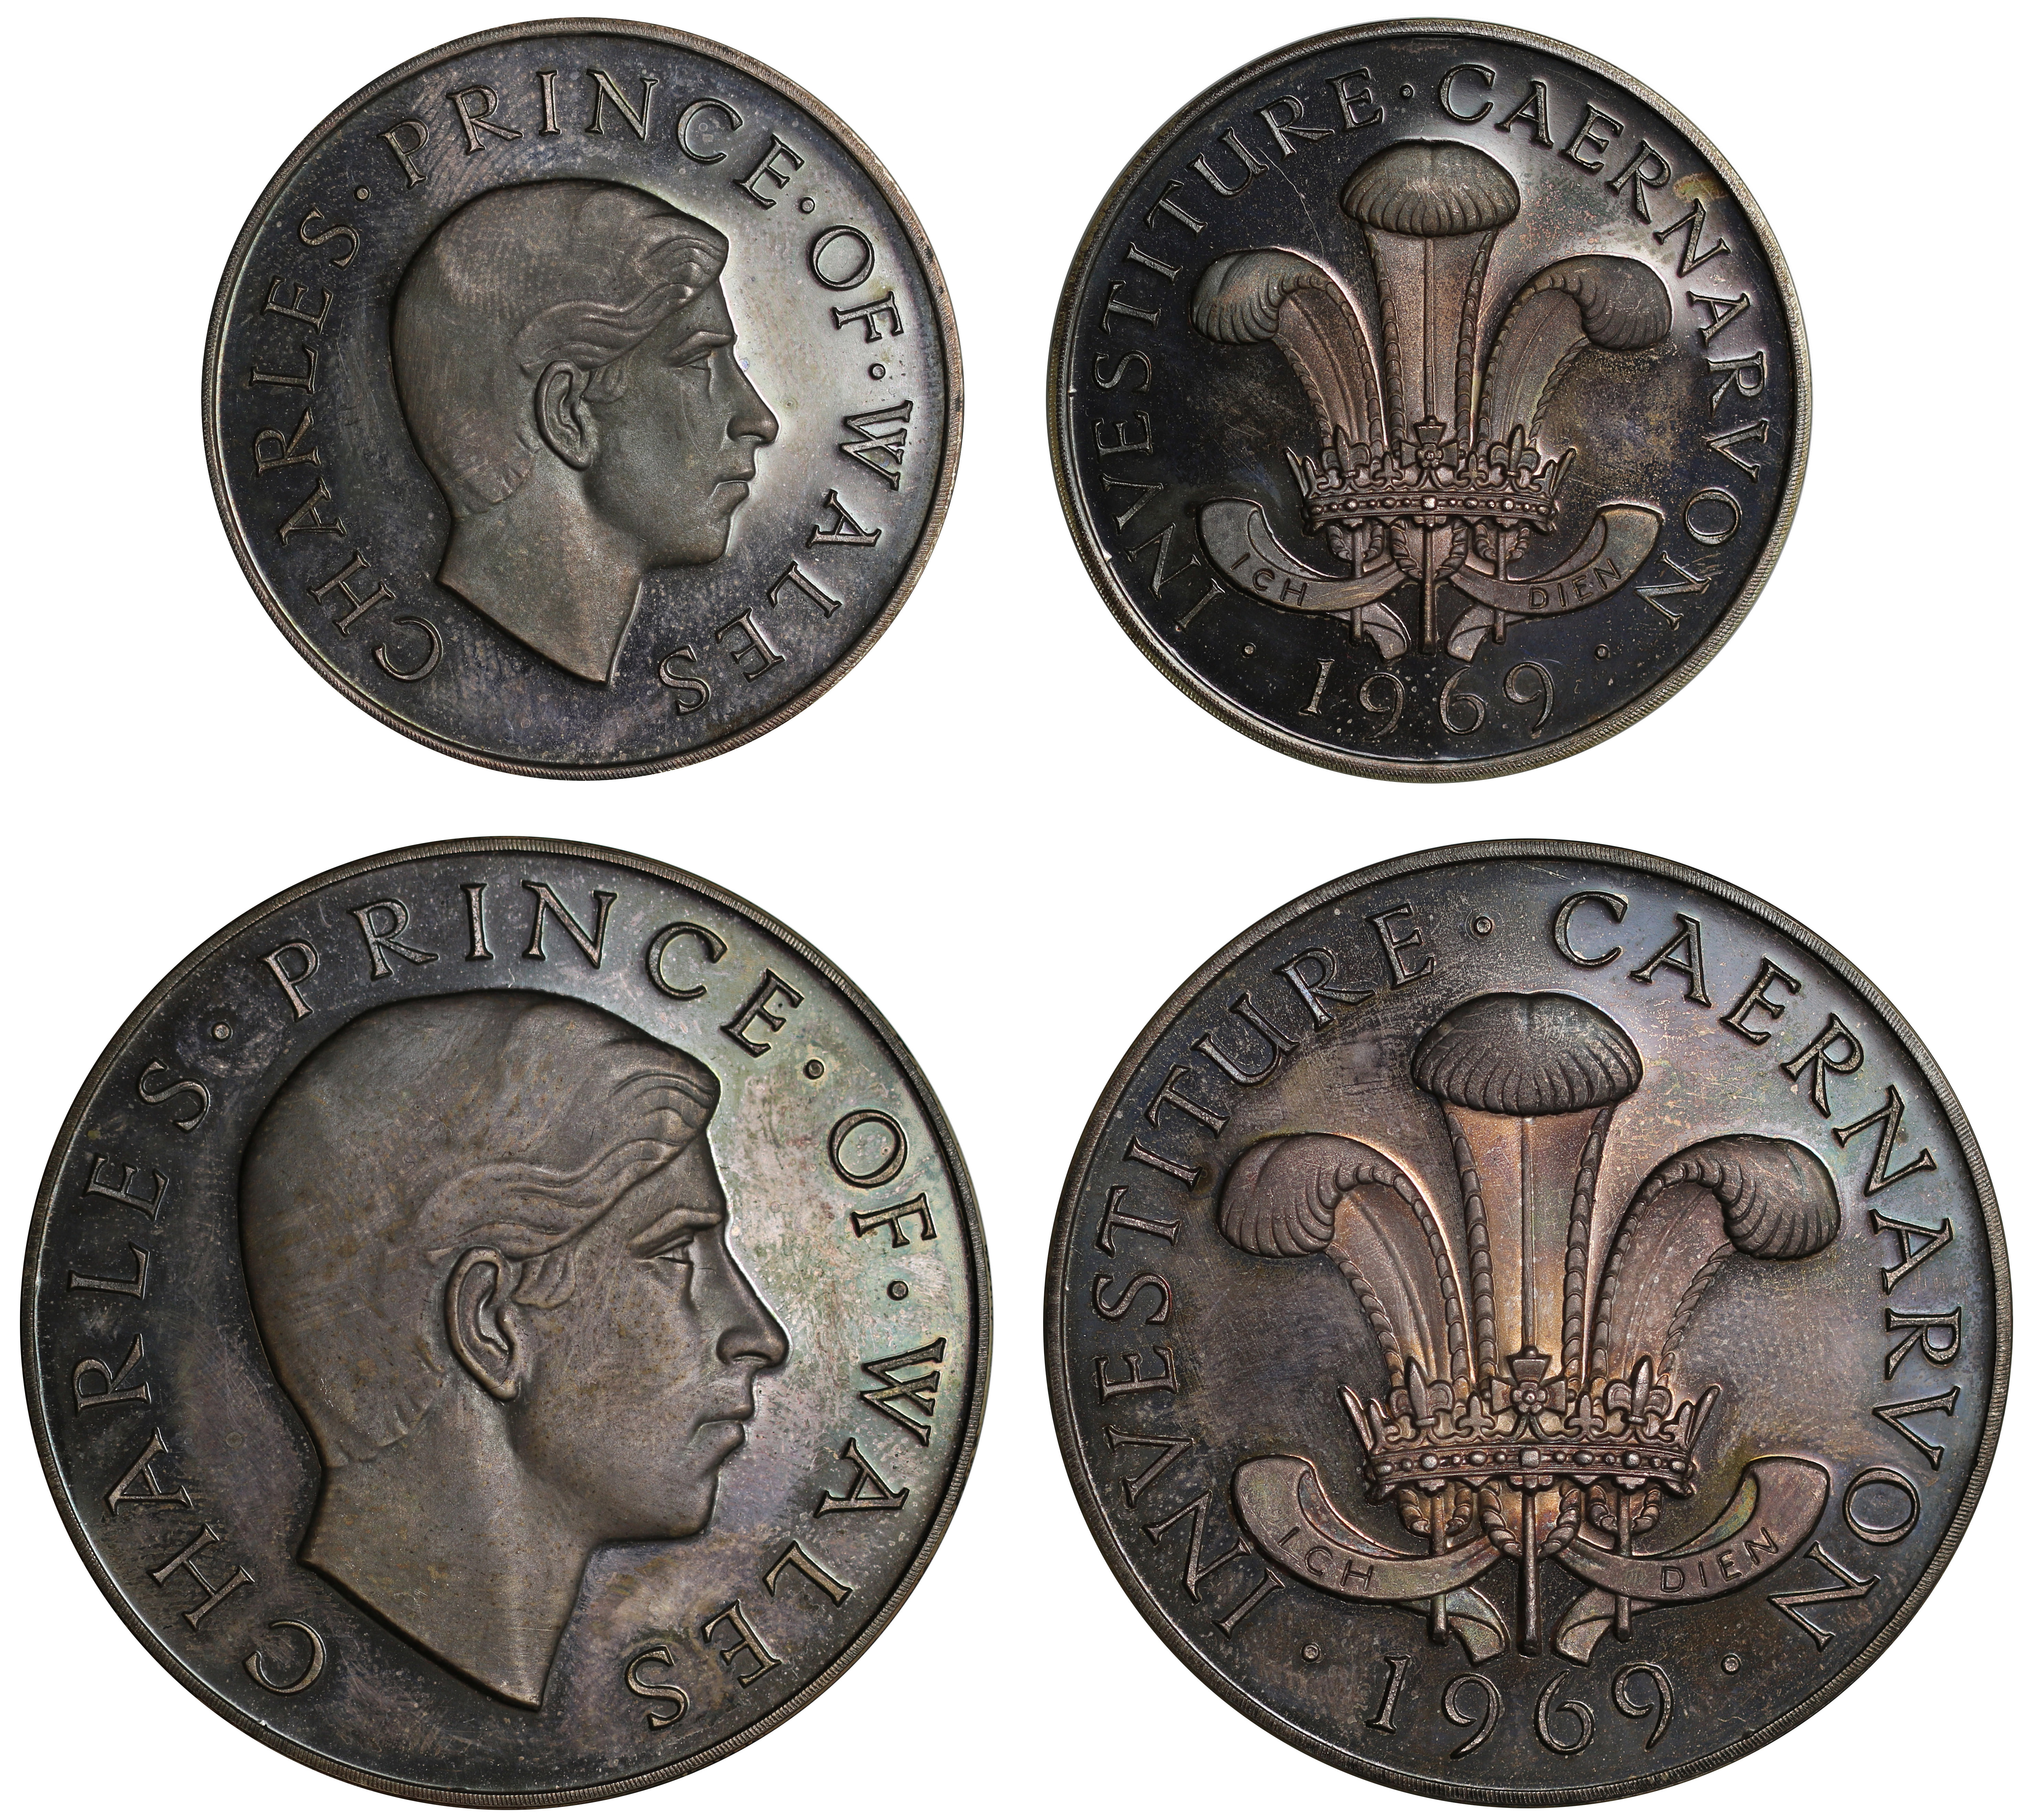 Charles, Prince of Wales, Investiture, 1969, sterling silver two-medal set, by John Pinches, head